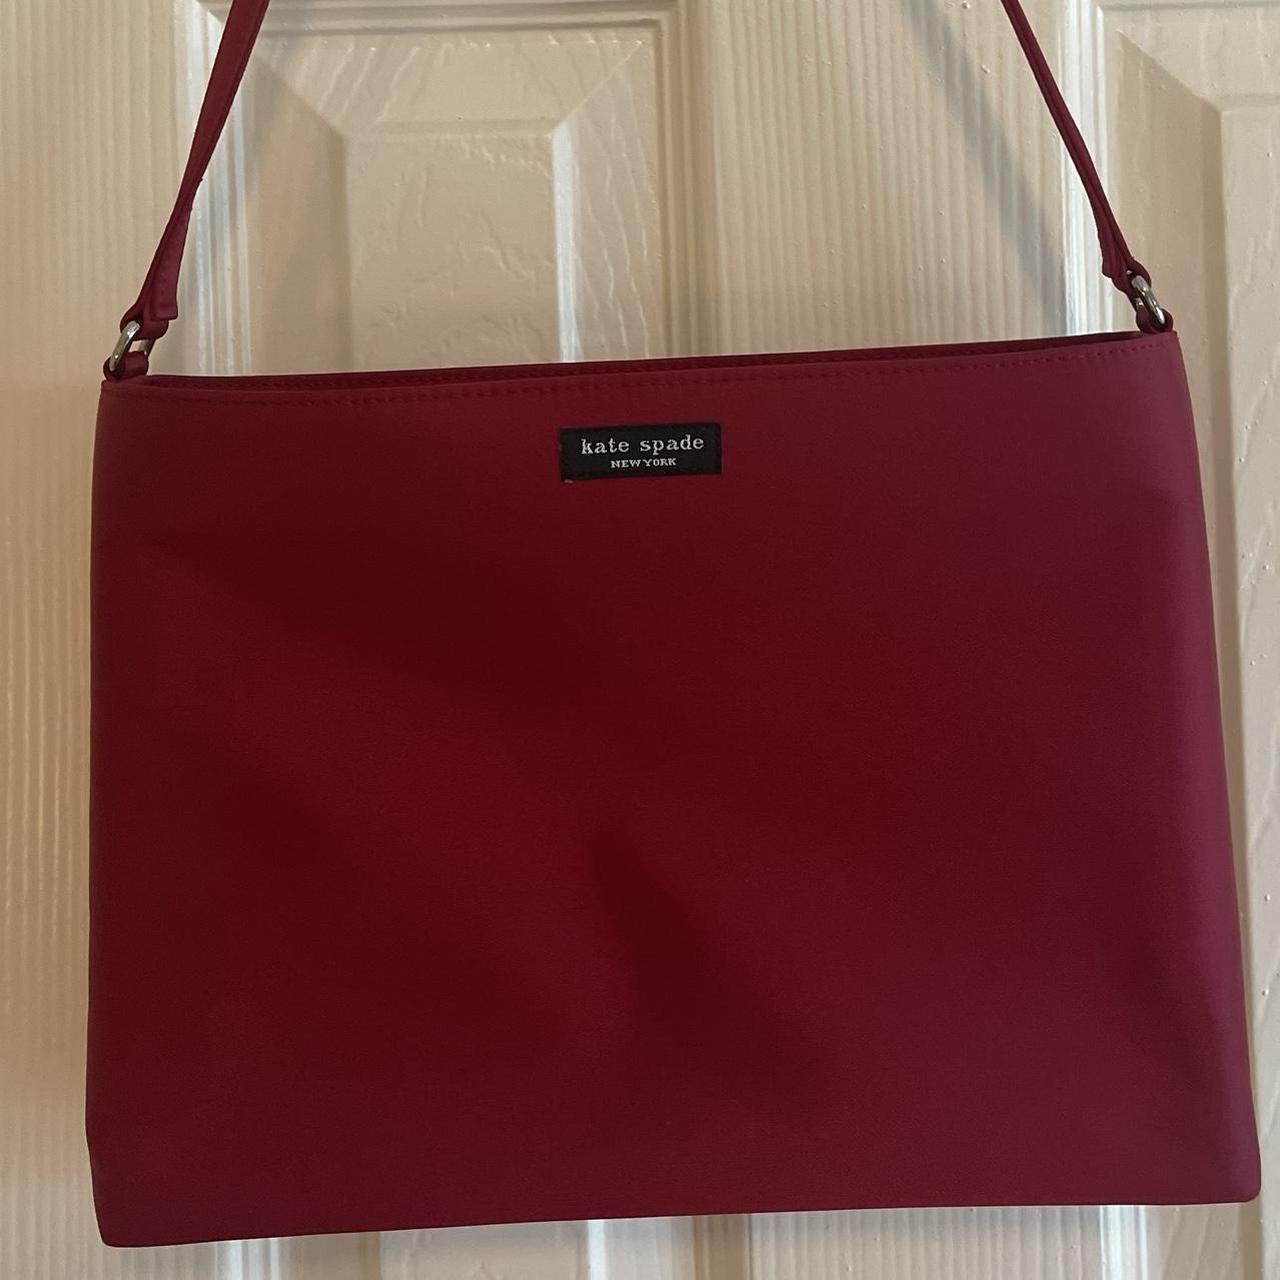 Score Up to 50% Off Kate Spade Handbags and Small Leather Goods Today - CNET